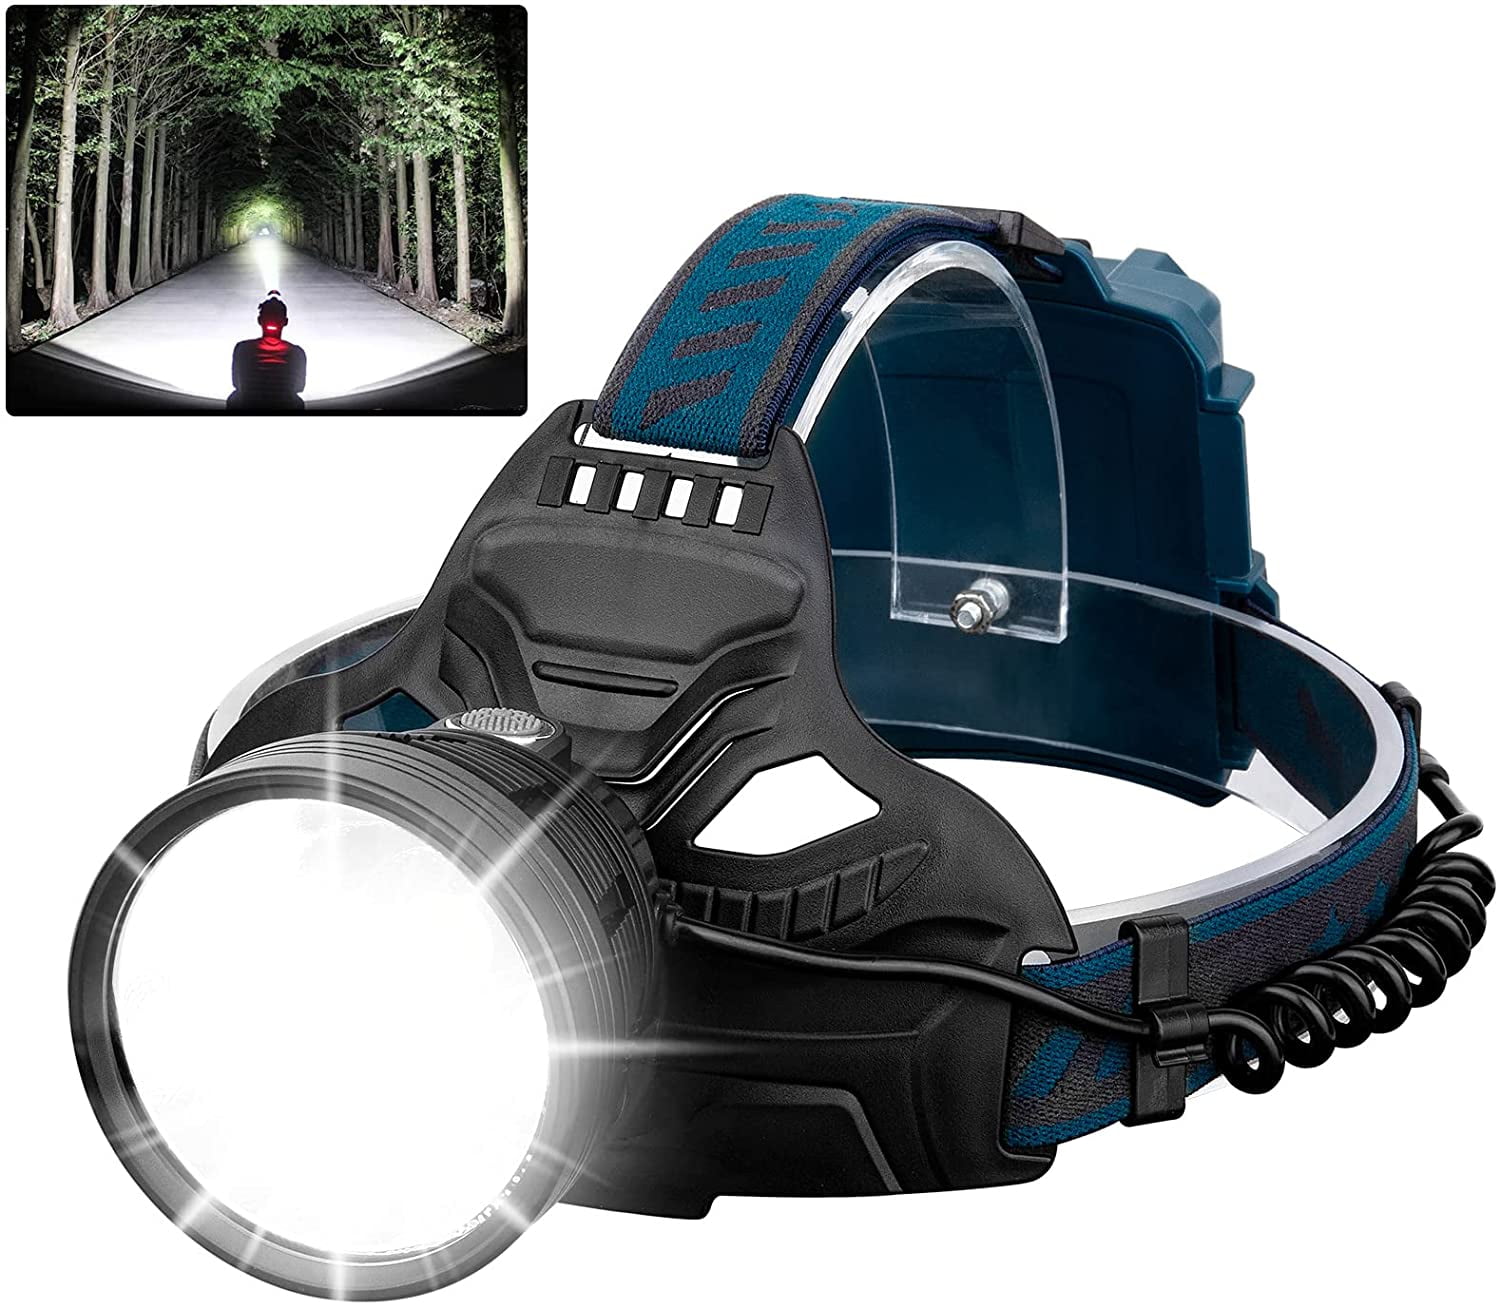 LED Rechargeable Headlamps for Adults, 90000 Lumen Super Bright Headlamp  Flashlight 90°Adjustable Modes IPX5 Waterproof USB Rechargeable Head Lamp  for Camping Running Hunting Cycling Climbing Hiking